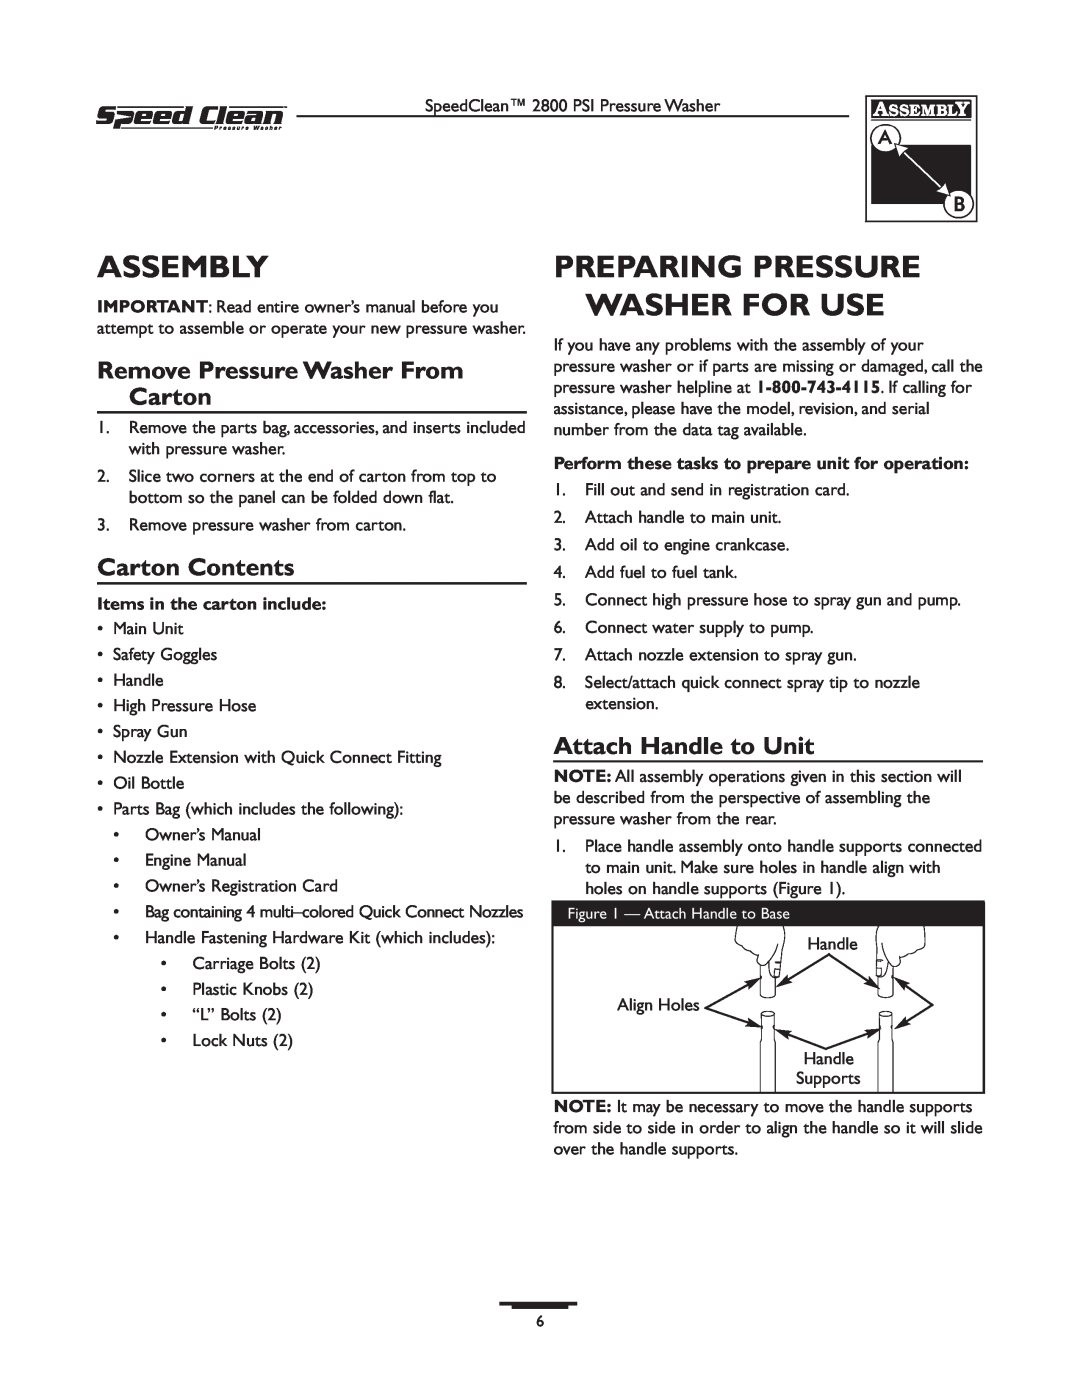 Briggs & Stratton 020212-0 owner manual Assembly, Preparing Pressure Washer For Use, Remove Pressure Washer From Carton 